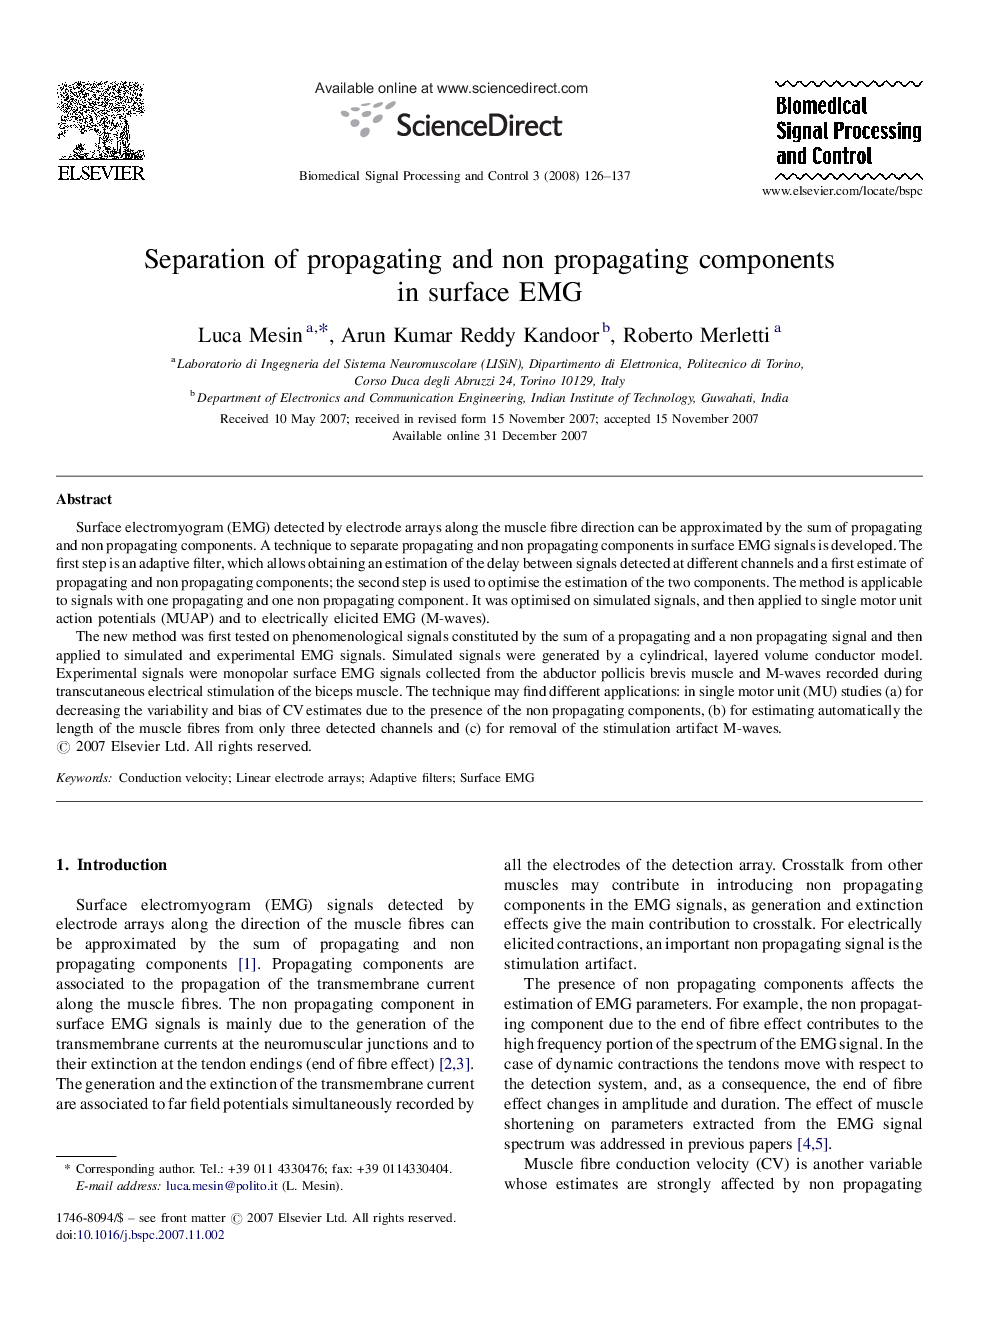 Separation of propagating and non propagating components in surface EMG